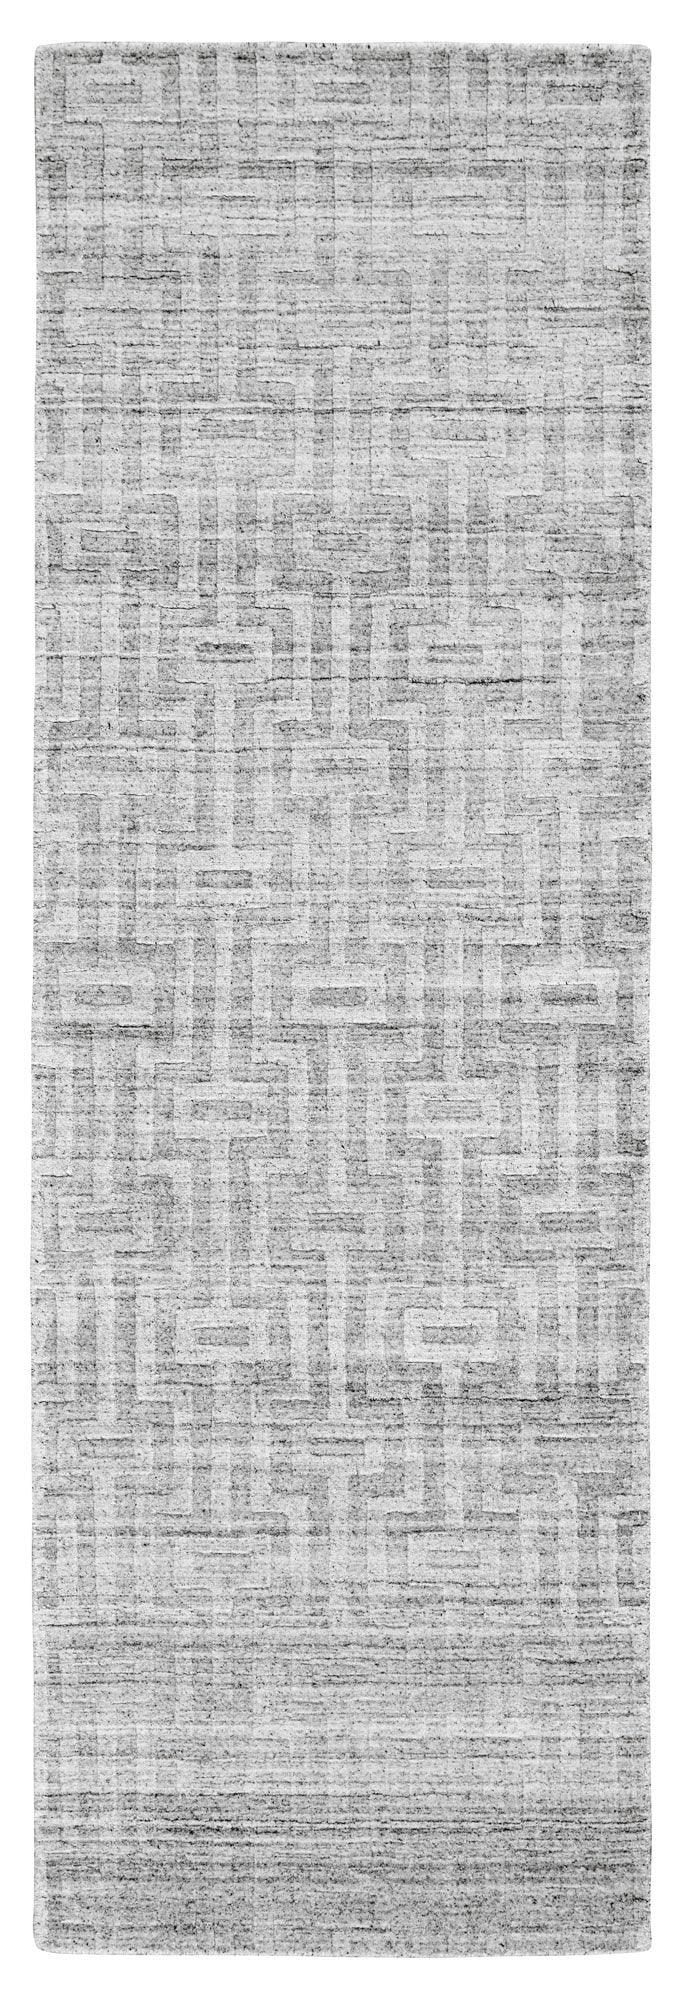 Gramercy Luxe Viscose Rug, High-low Pile, Light Silver Gray, 4ft x 6ft Area Rug - Modern Rug Importers